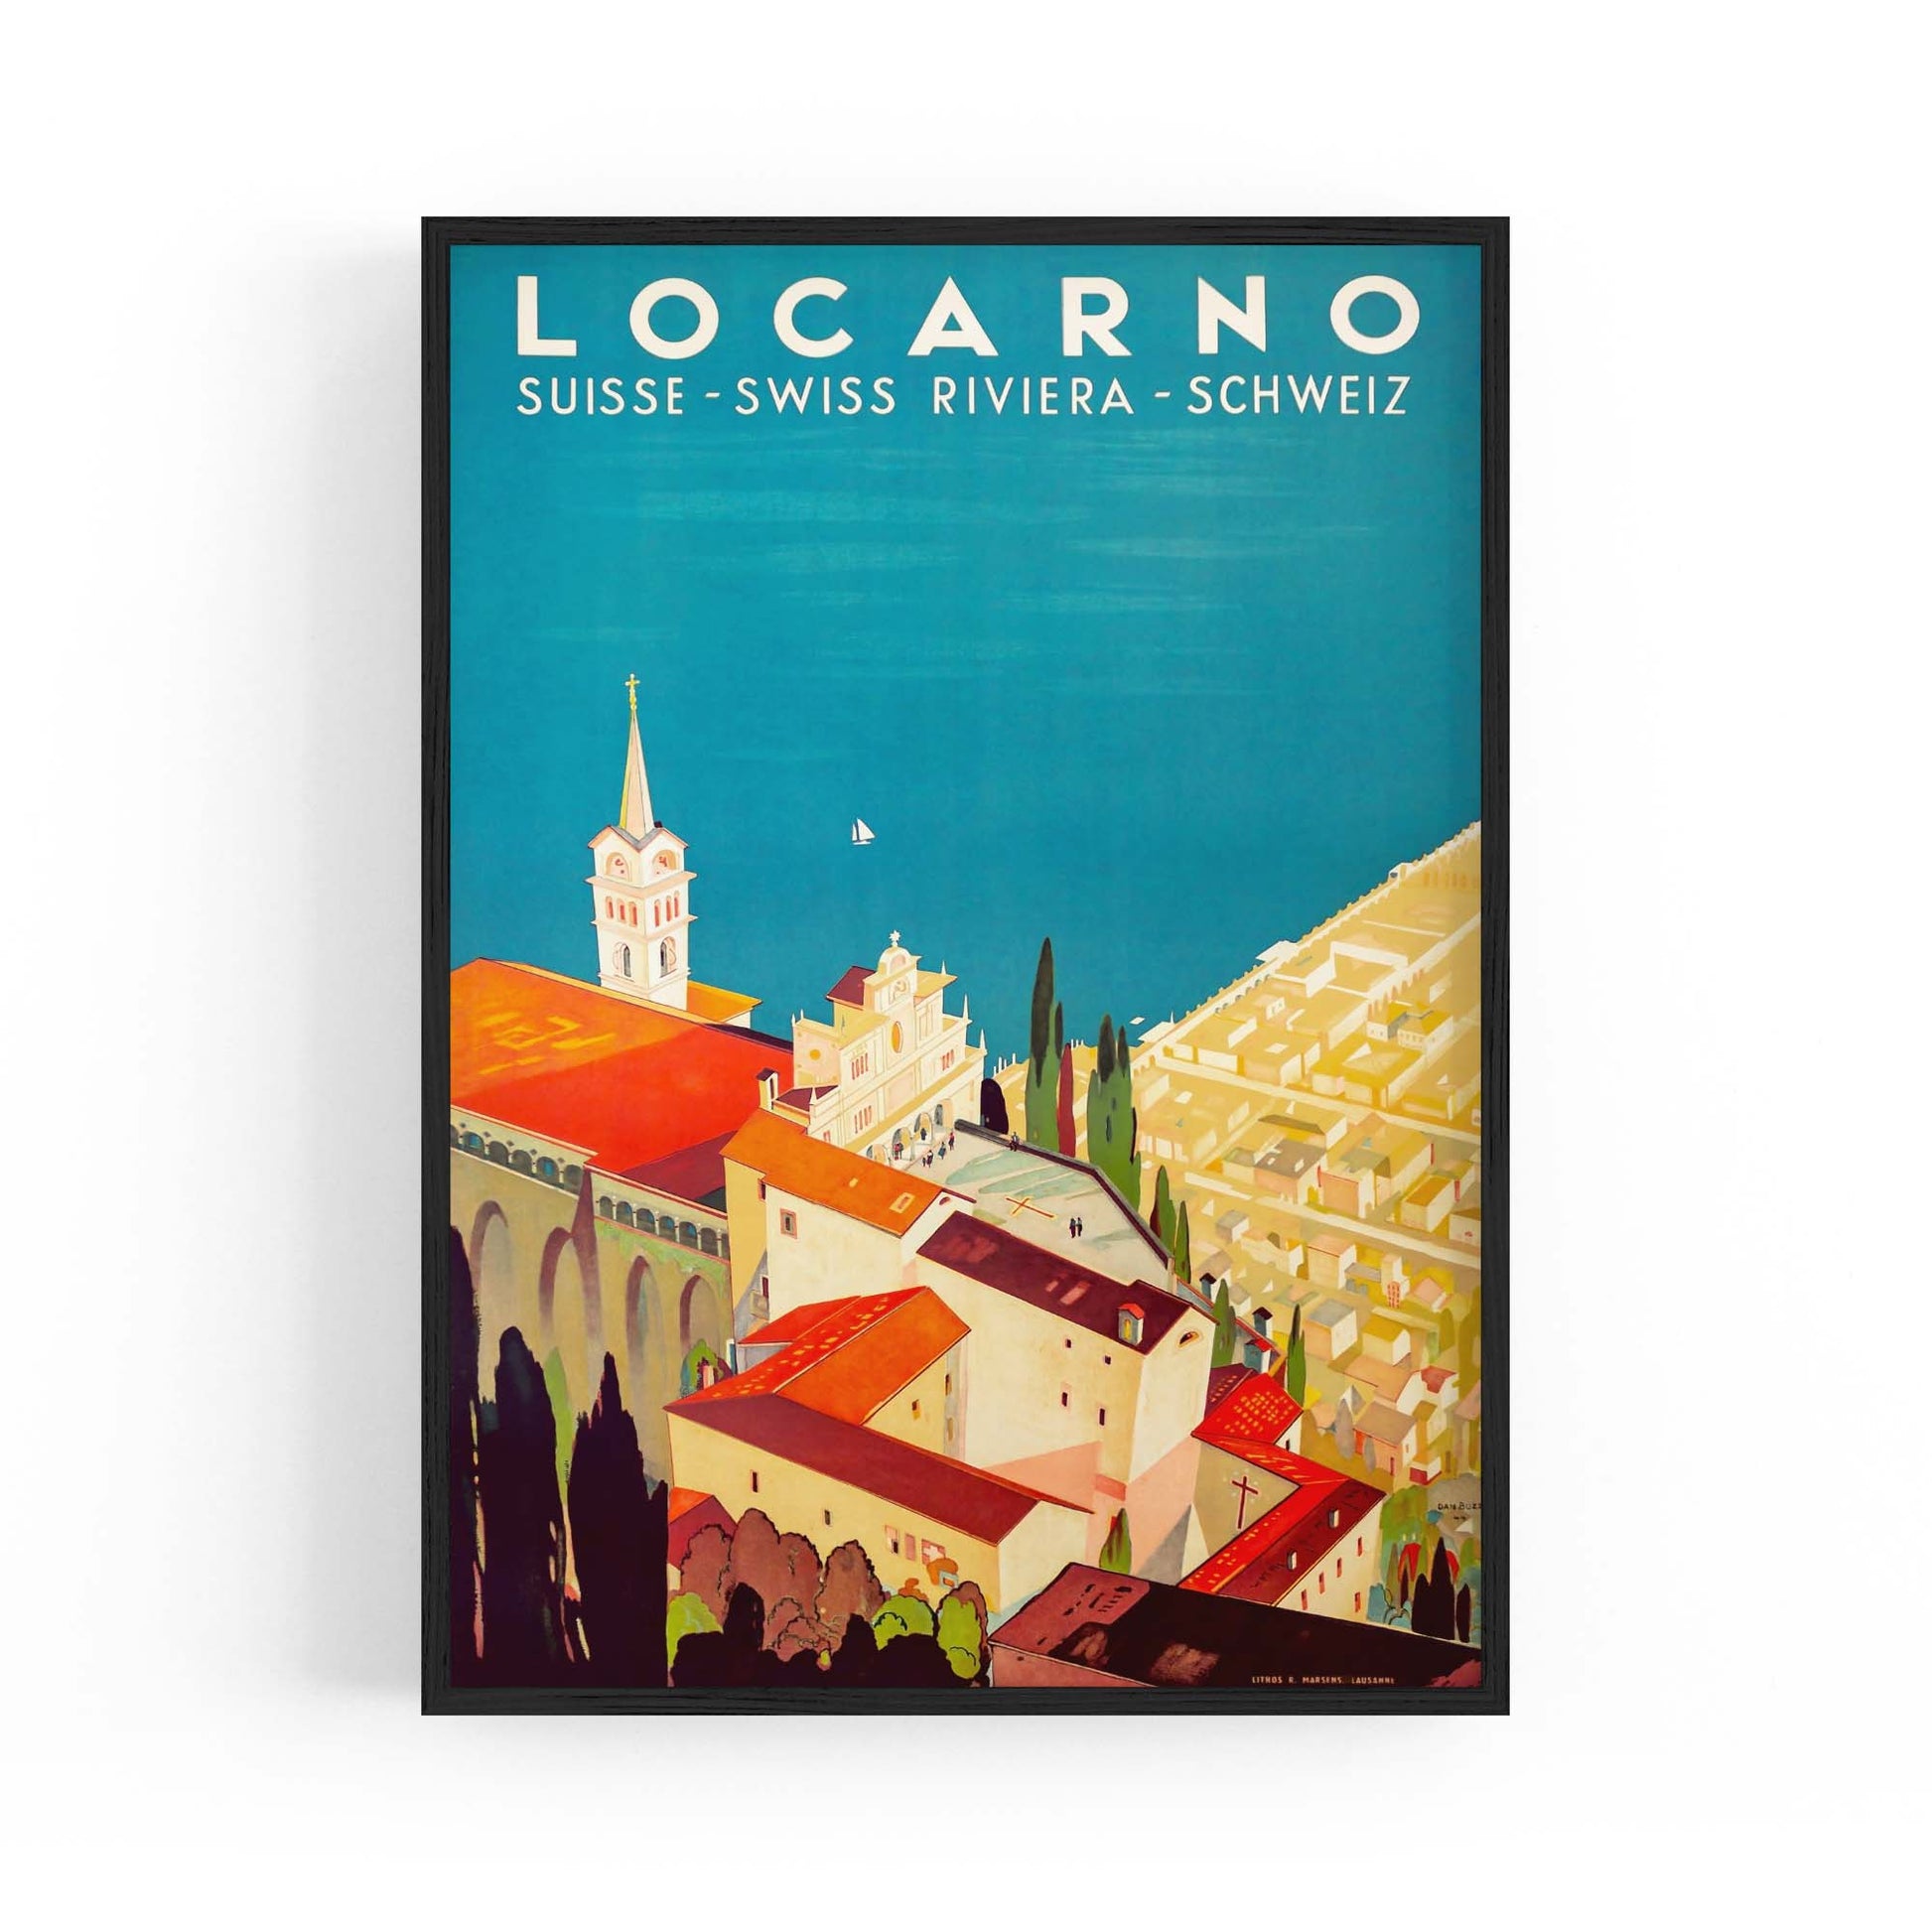 Locarno Switzerland Vintage Travel Advert Wall Art - The Affordable Art Company